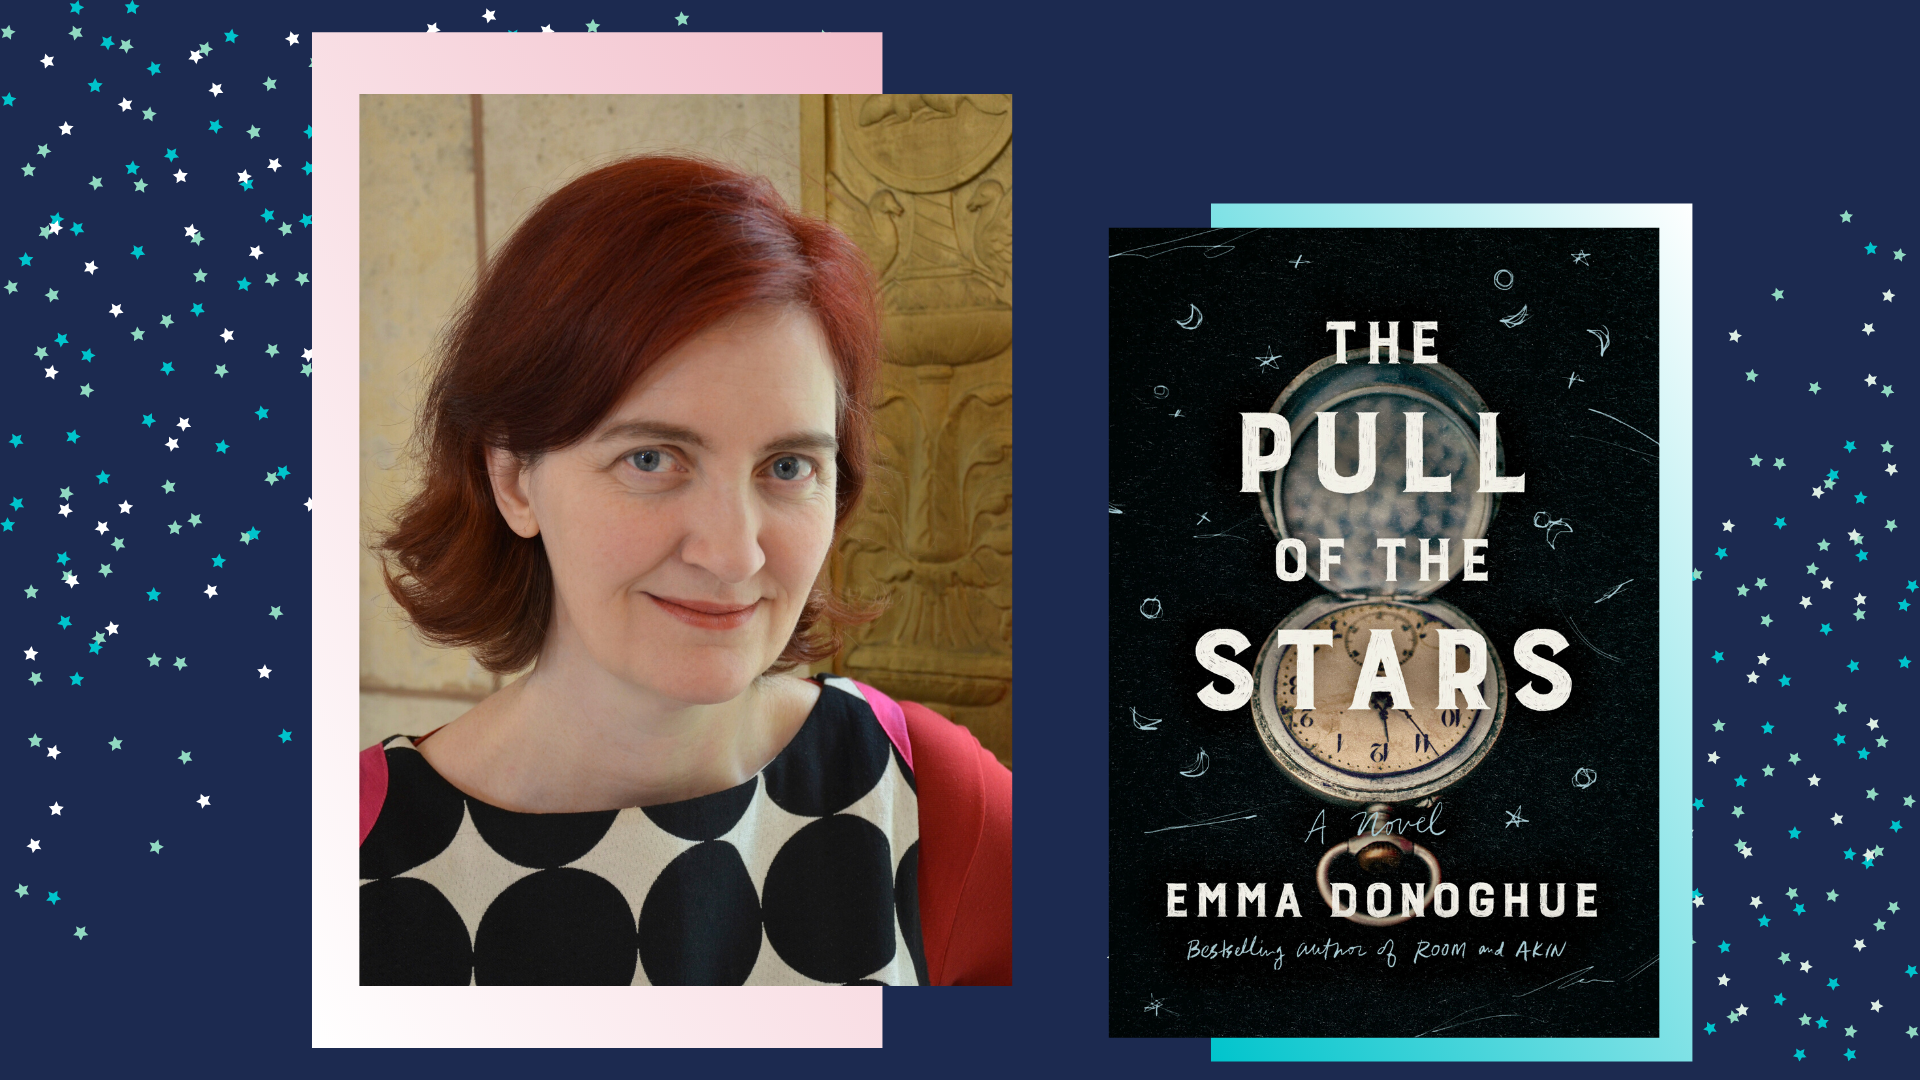 emma donoghue the pull of the stars review